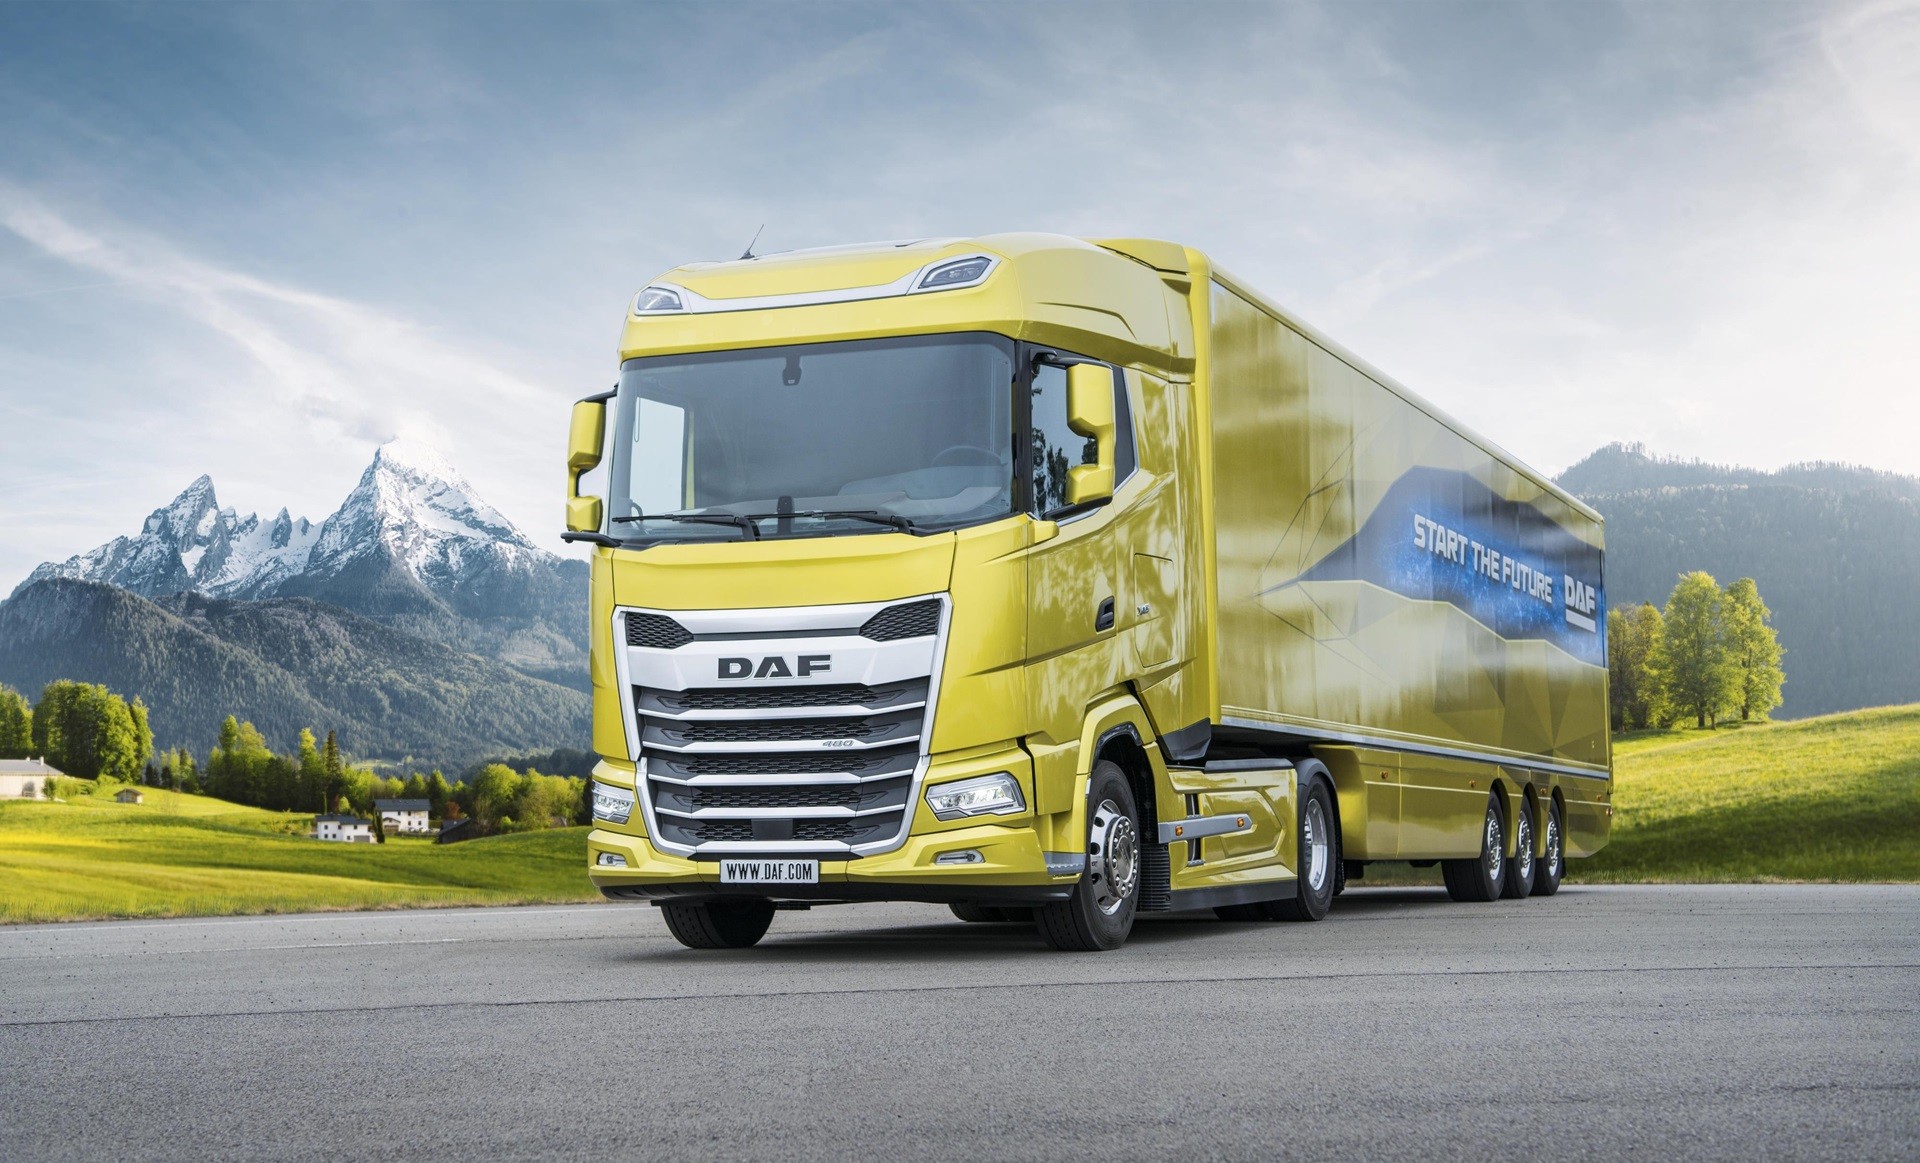 Enjoy the road with DAF DPF delete